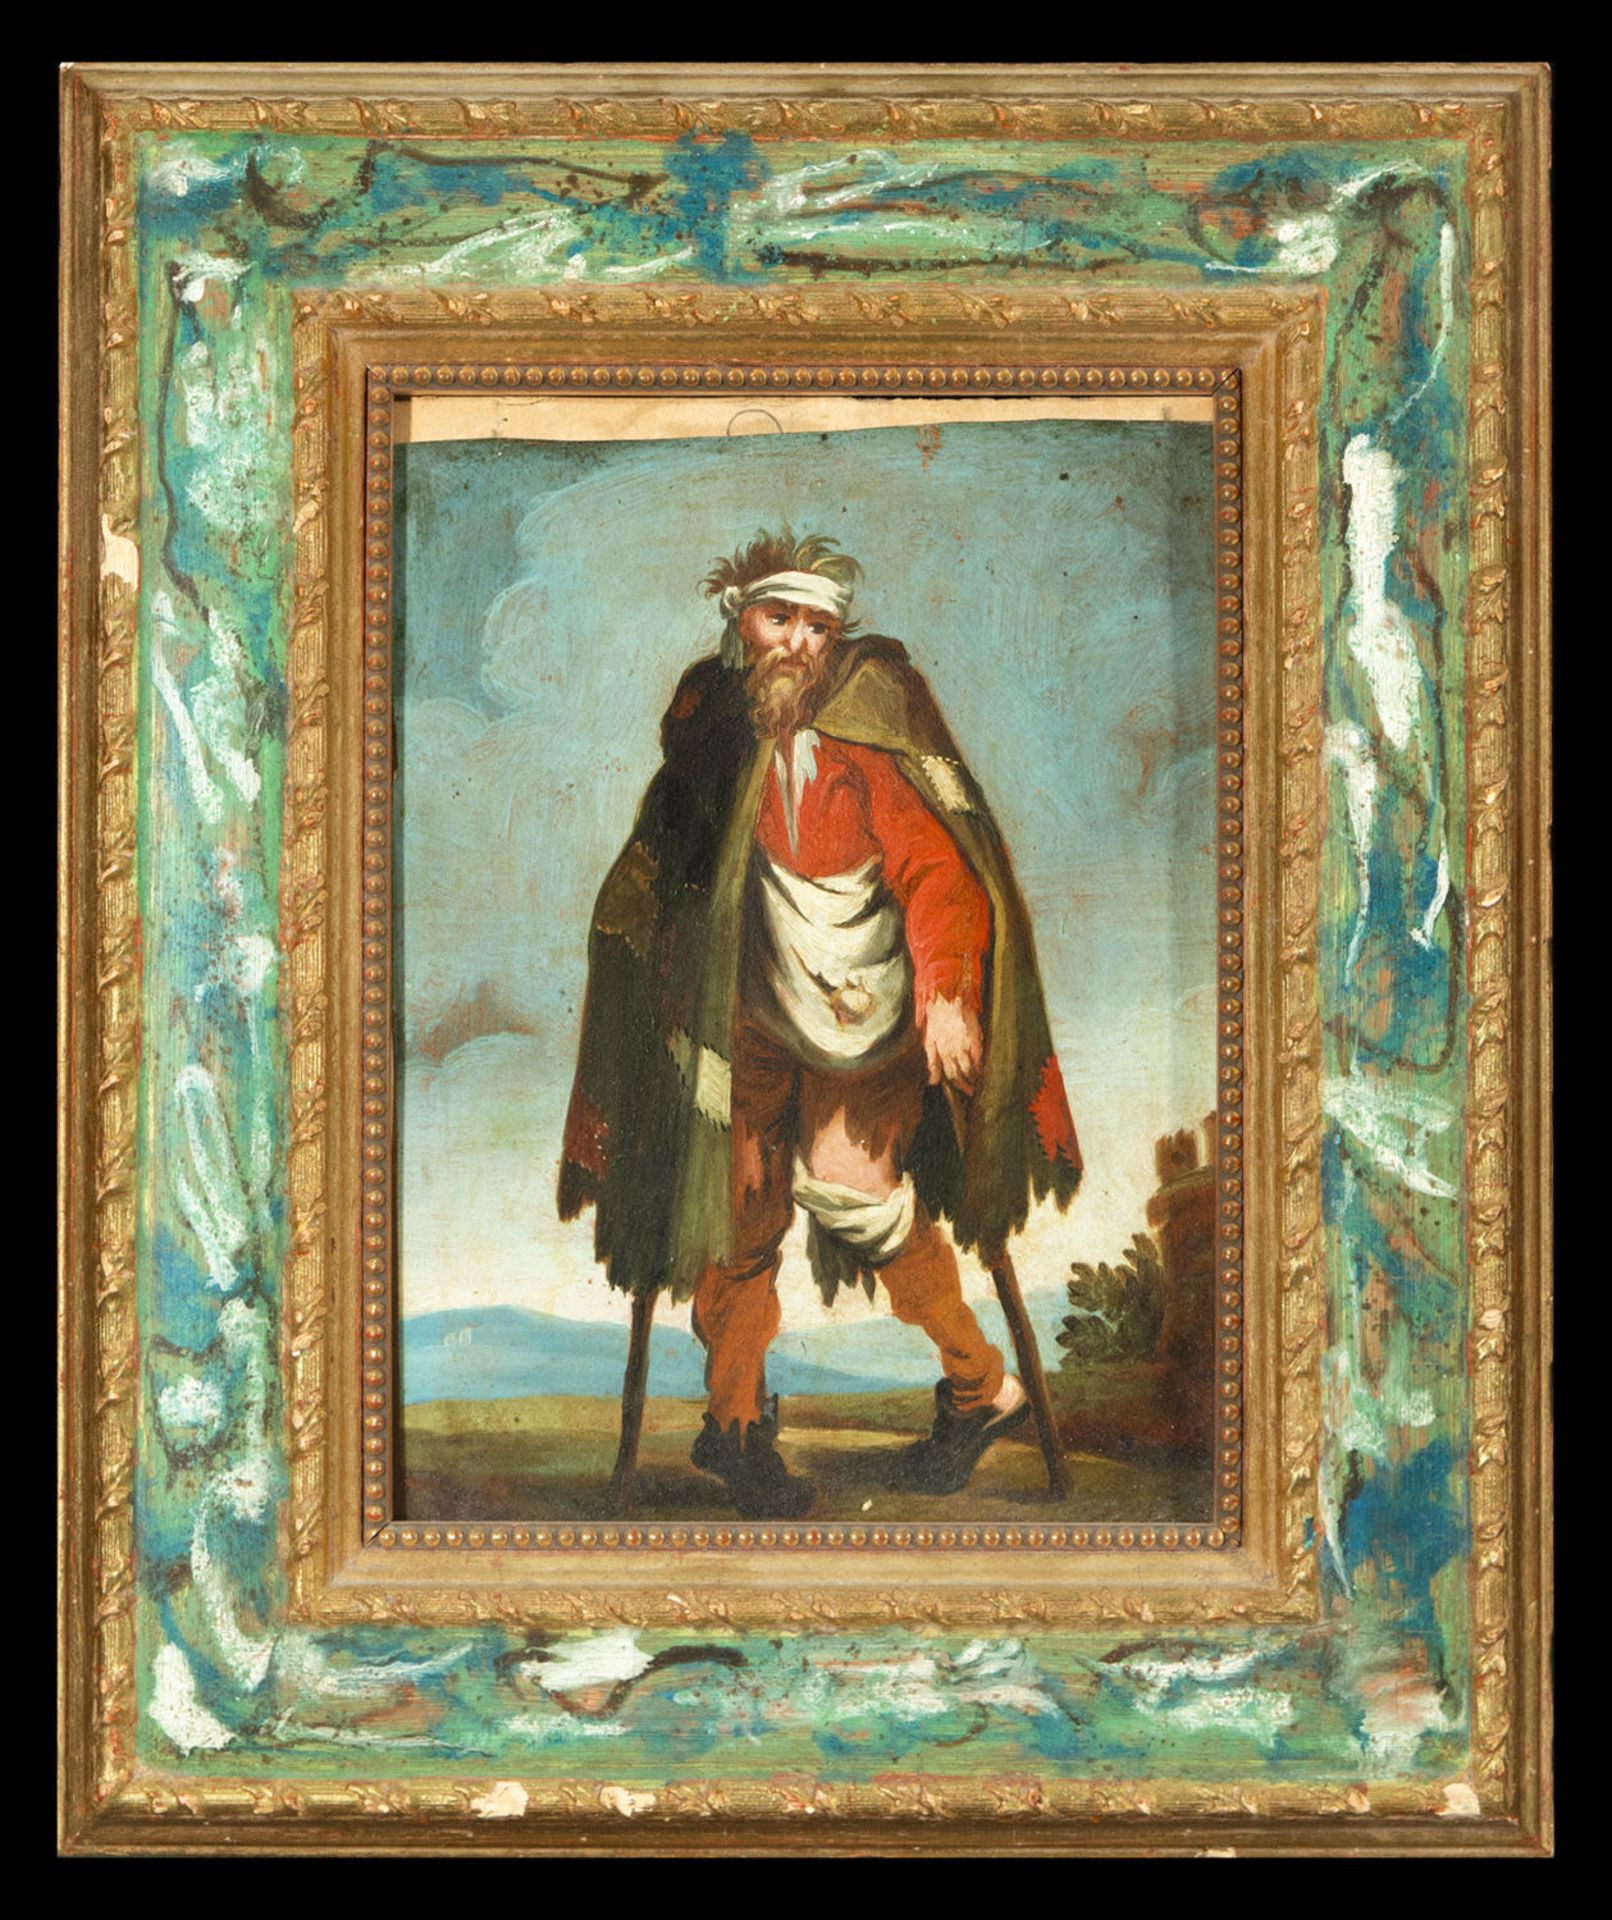 Capitano de Baroni in oil on copper with antique Italian marbled frame from the 18th century